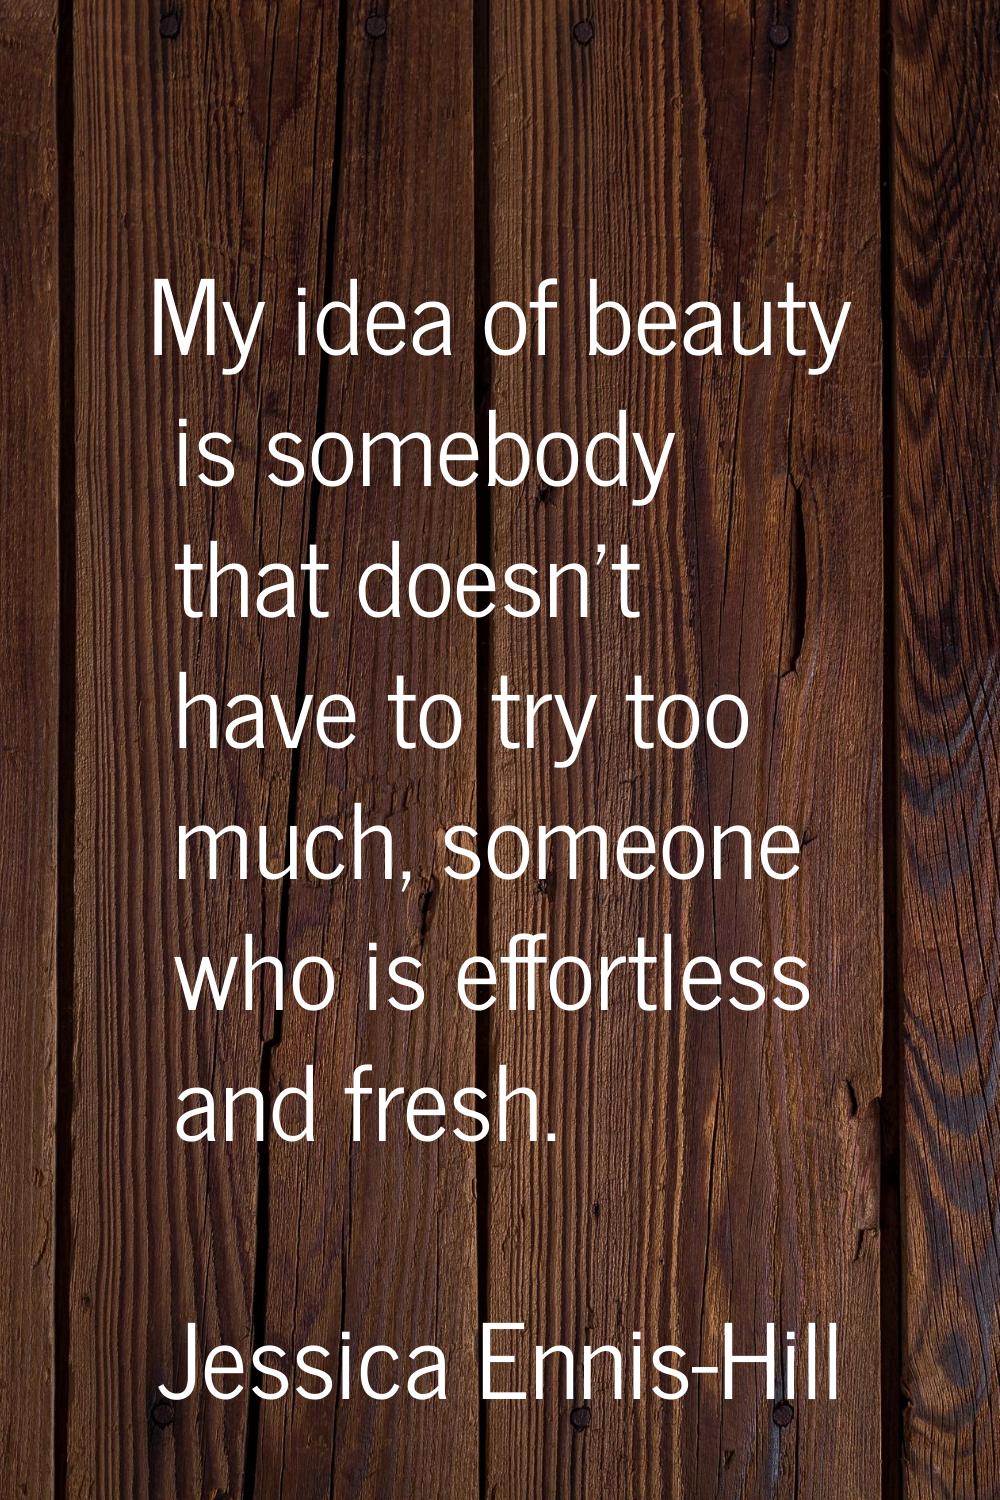 My idea of beauty is somebody that doesn't have to try too much, someone who is effortless and fres